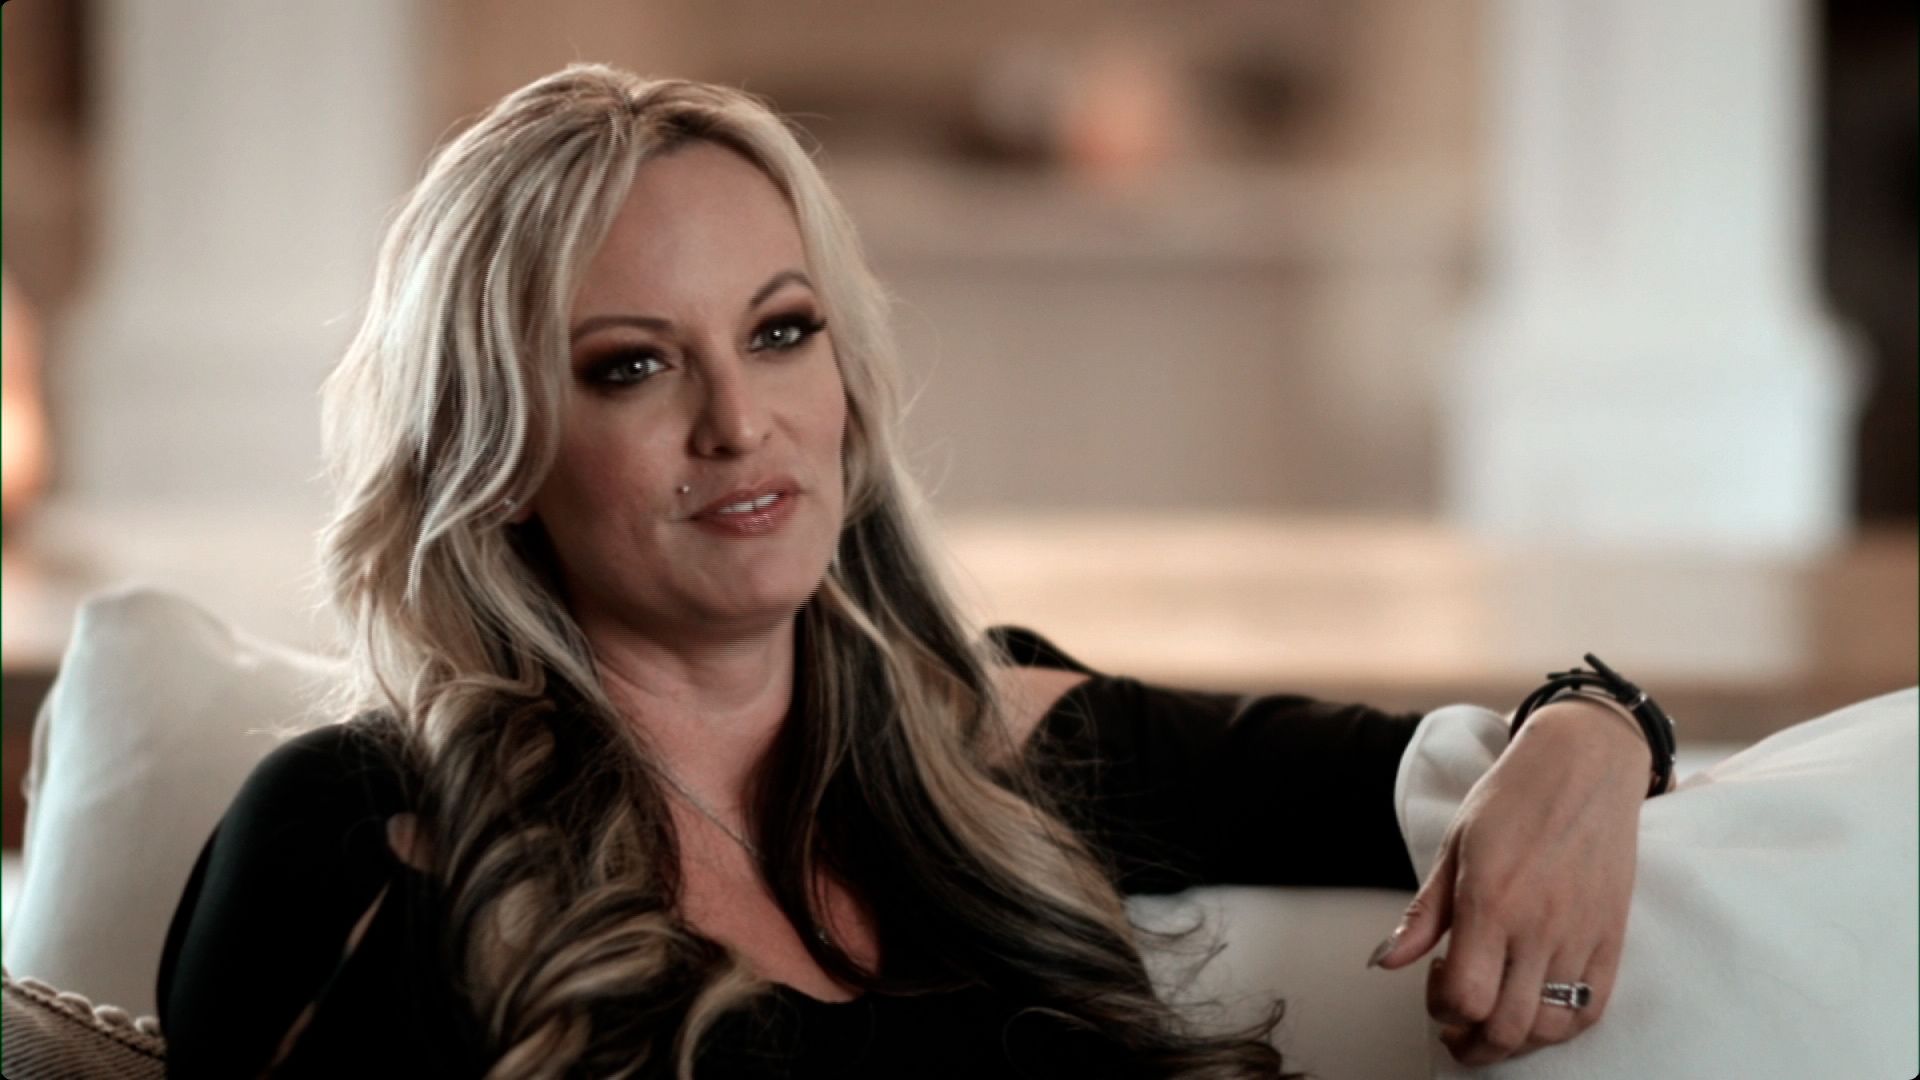 Opinion: Stormy Daniels has the last word on Trump - Entertainment - News